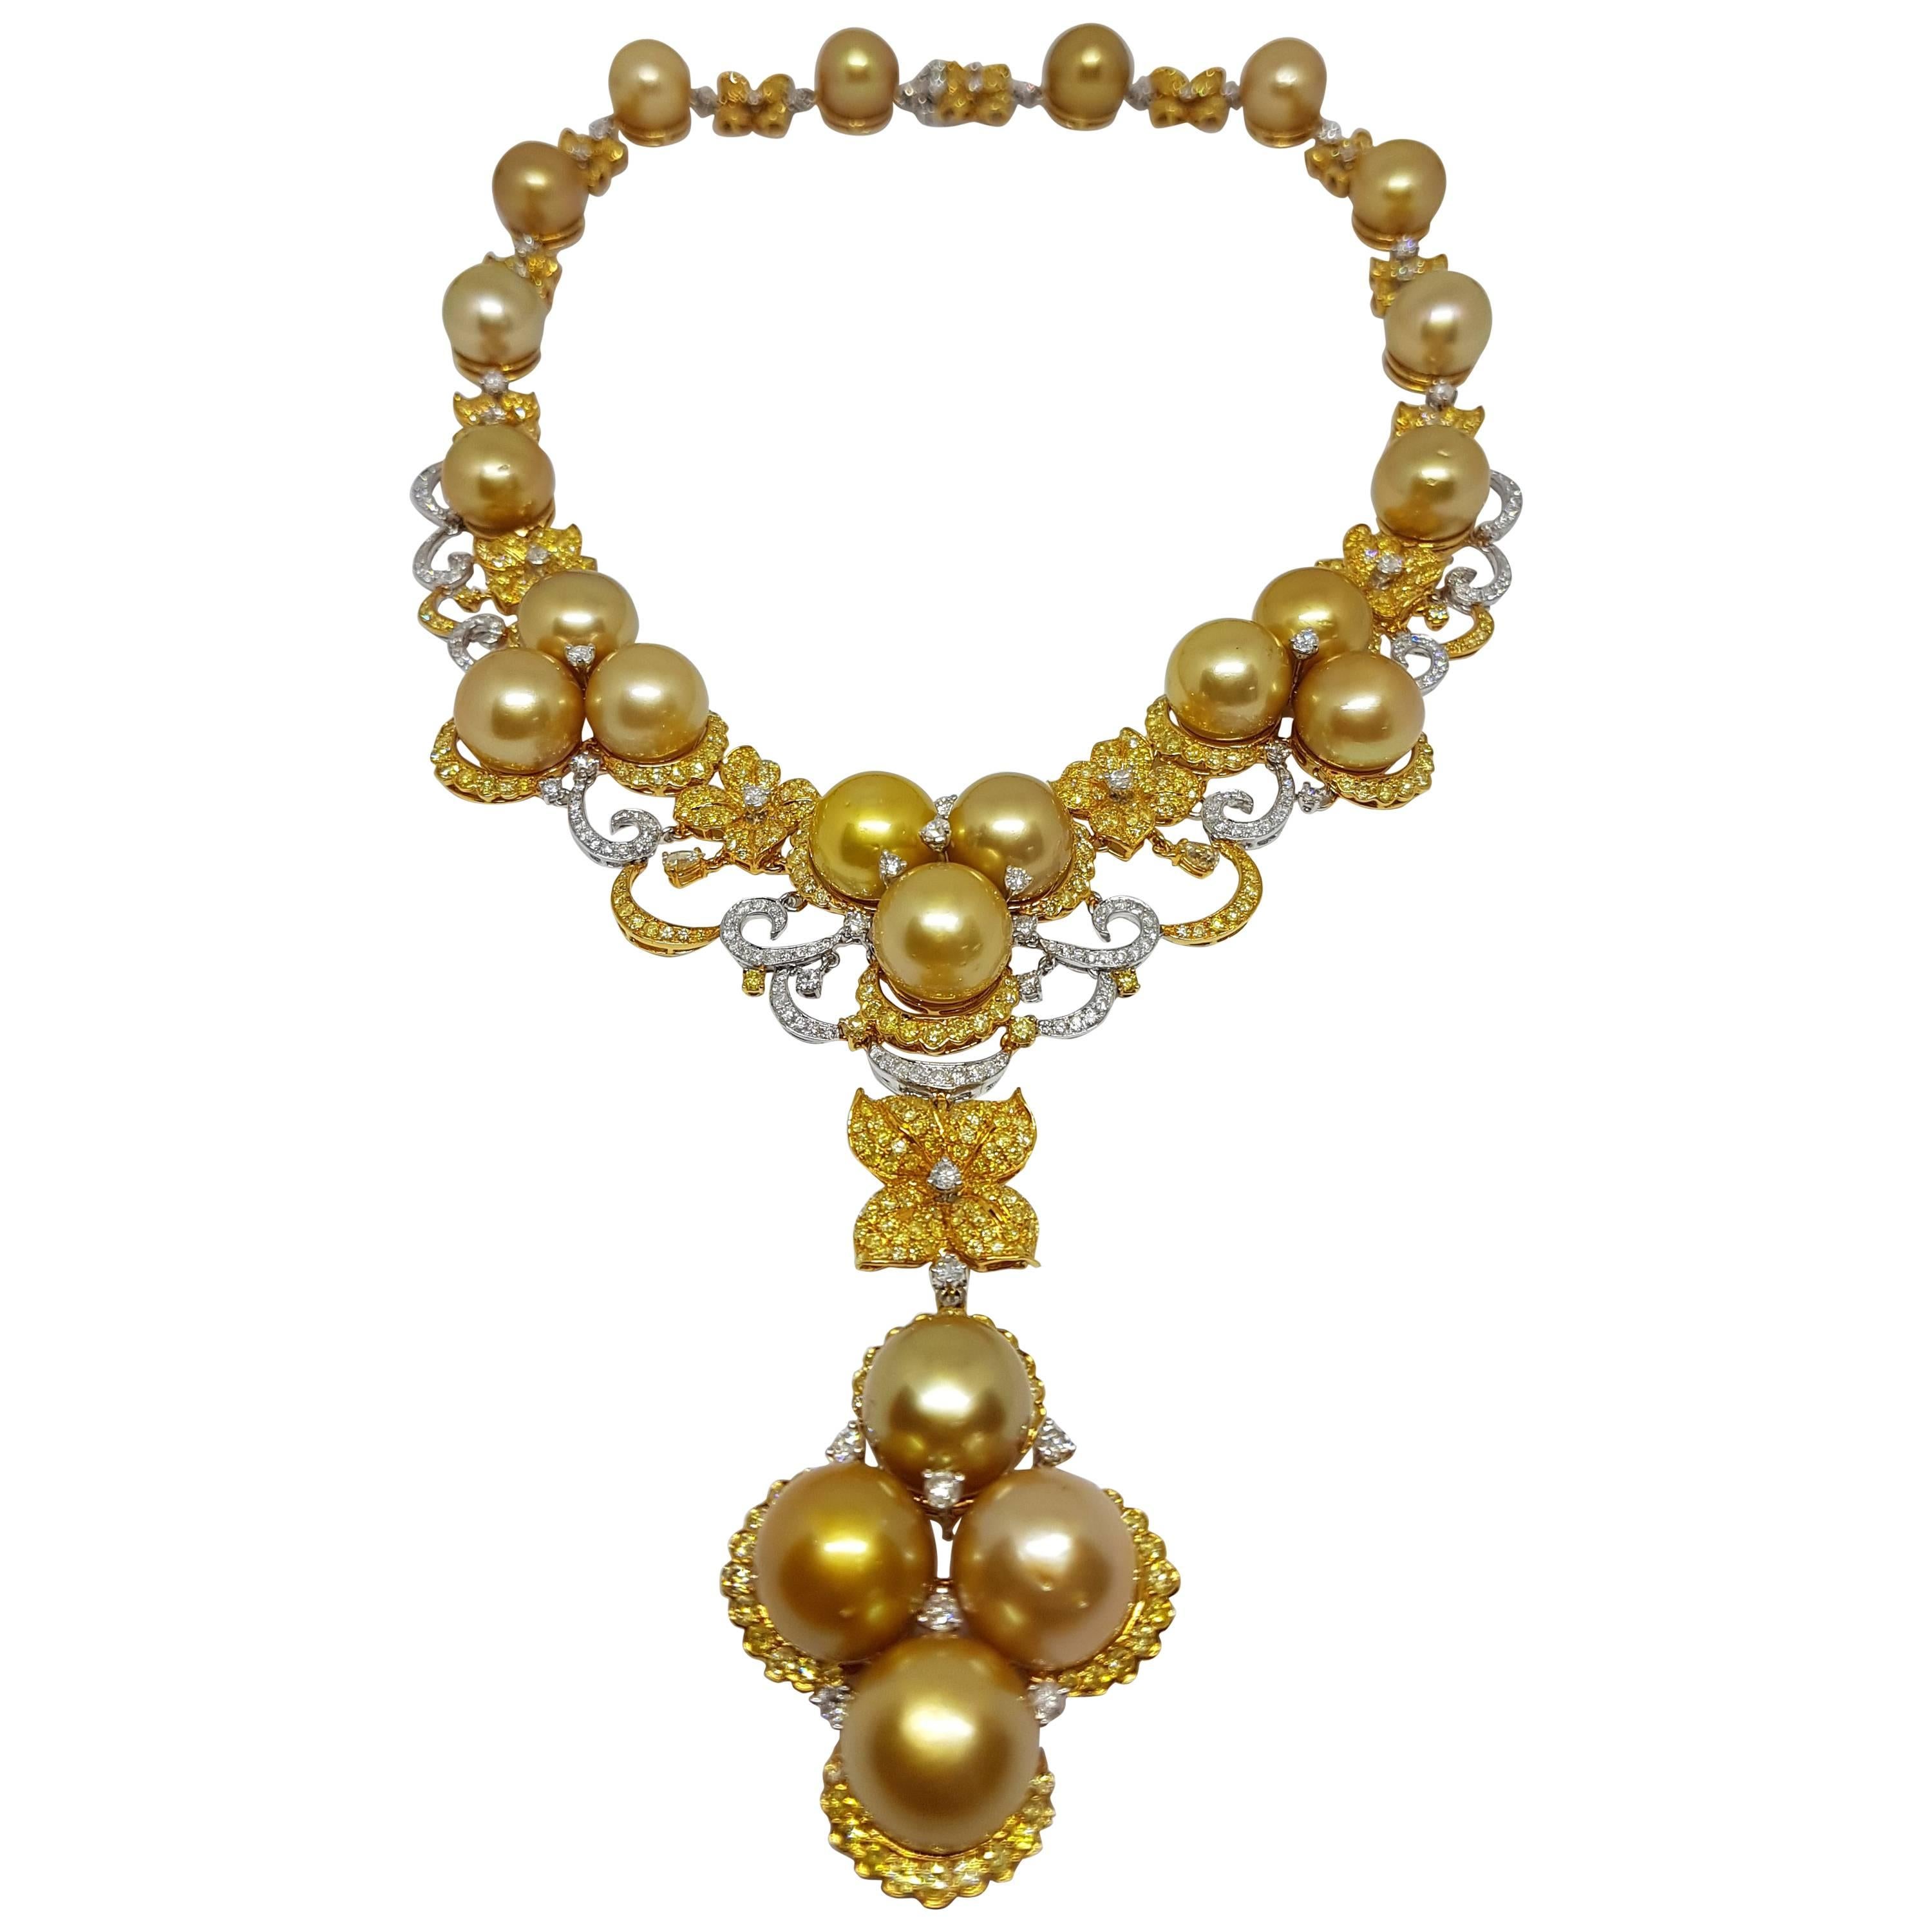 Golden South Sea Pearl Necklace with Diamonds and 18kt Gold 64.26 grams For Sale